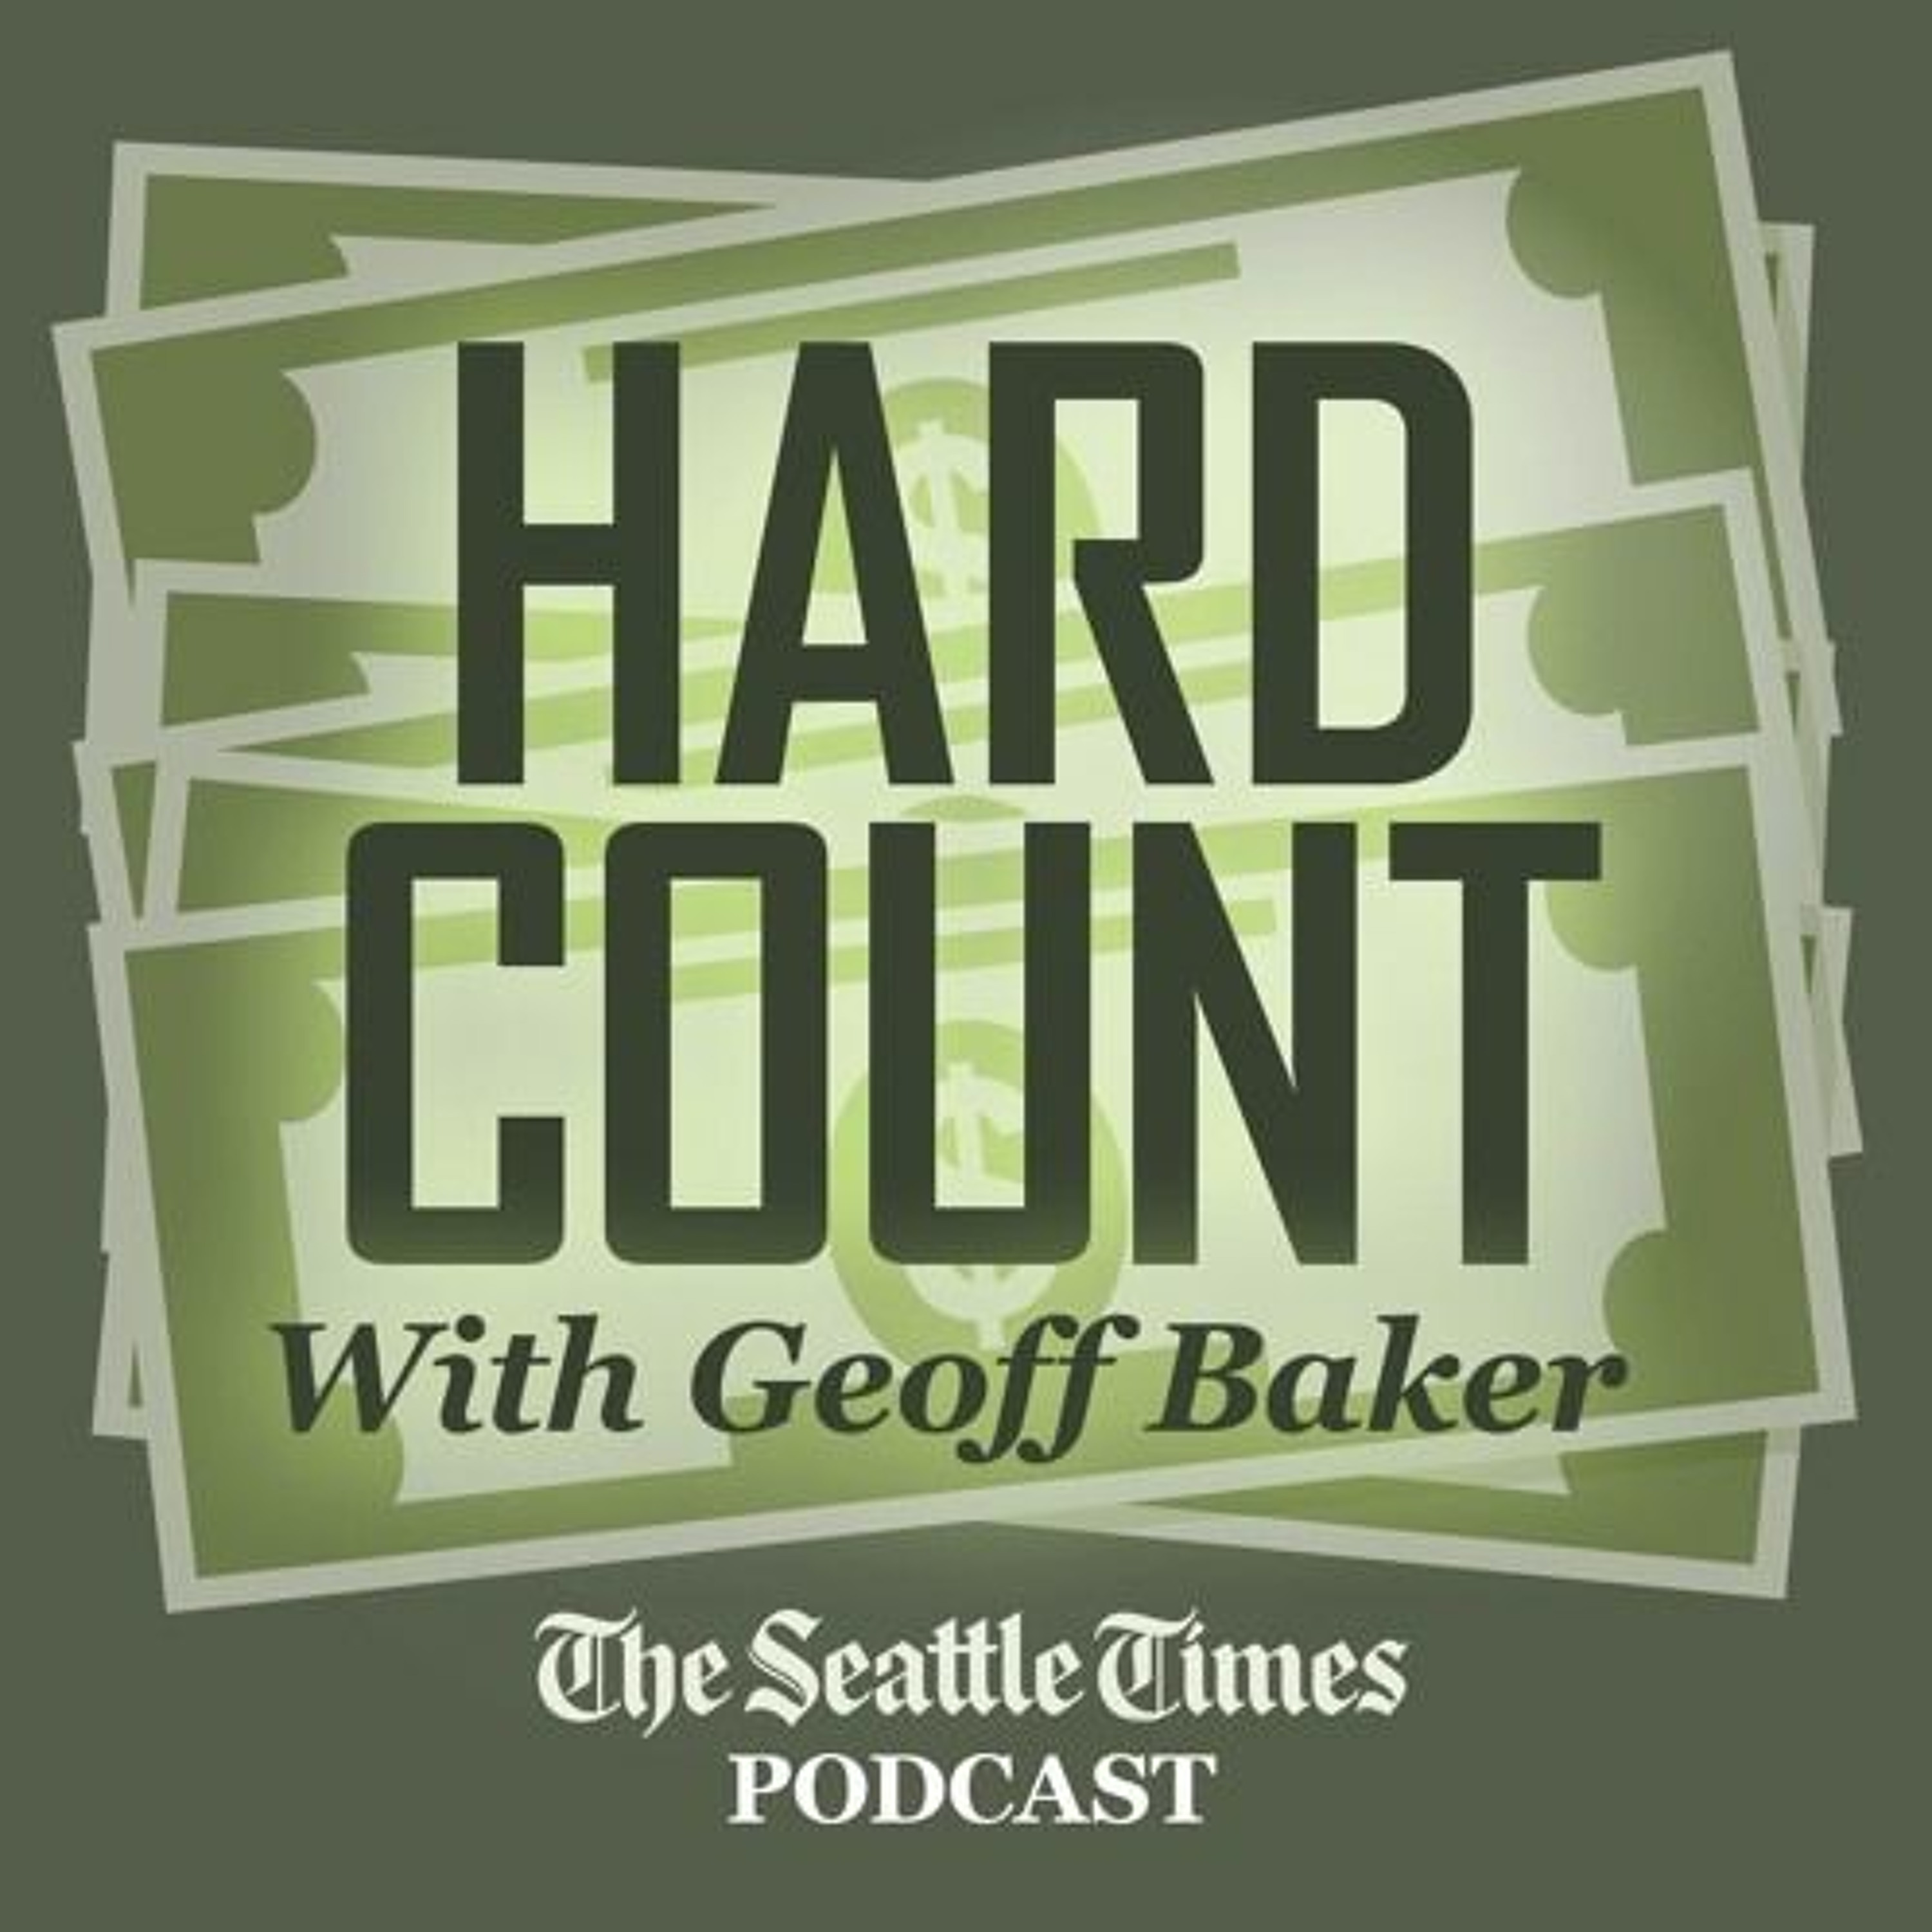 Ep. 19: Comparing the city of Seattle’s arena plans